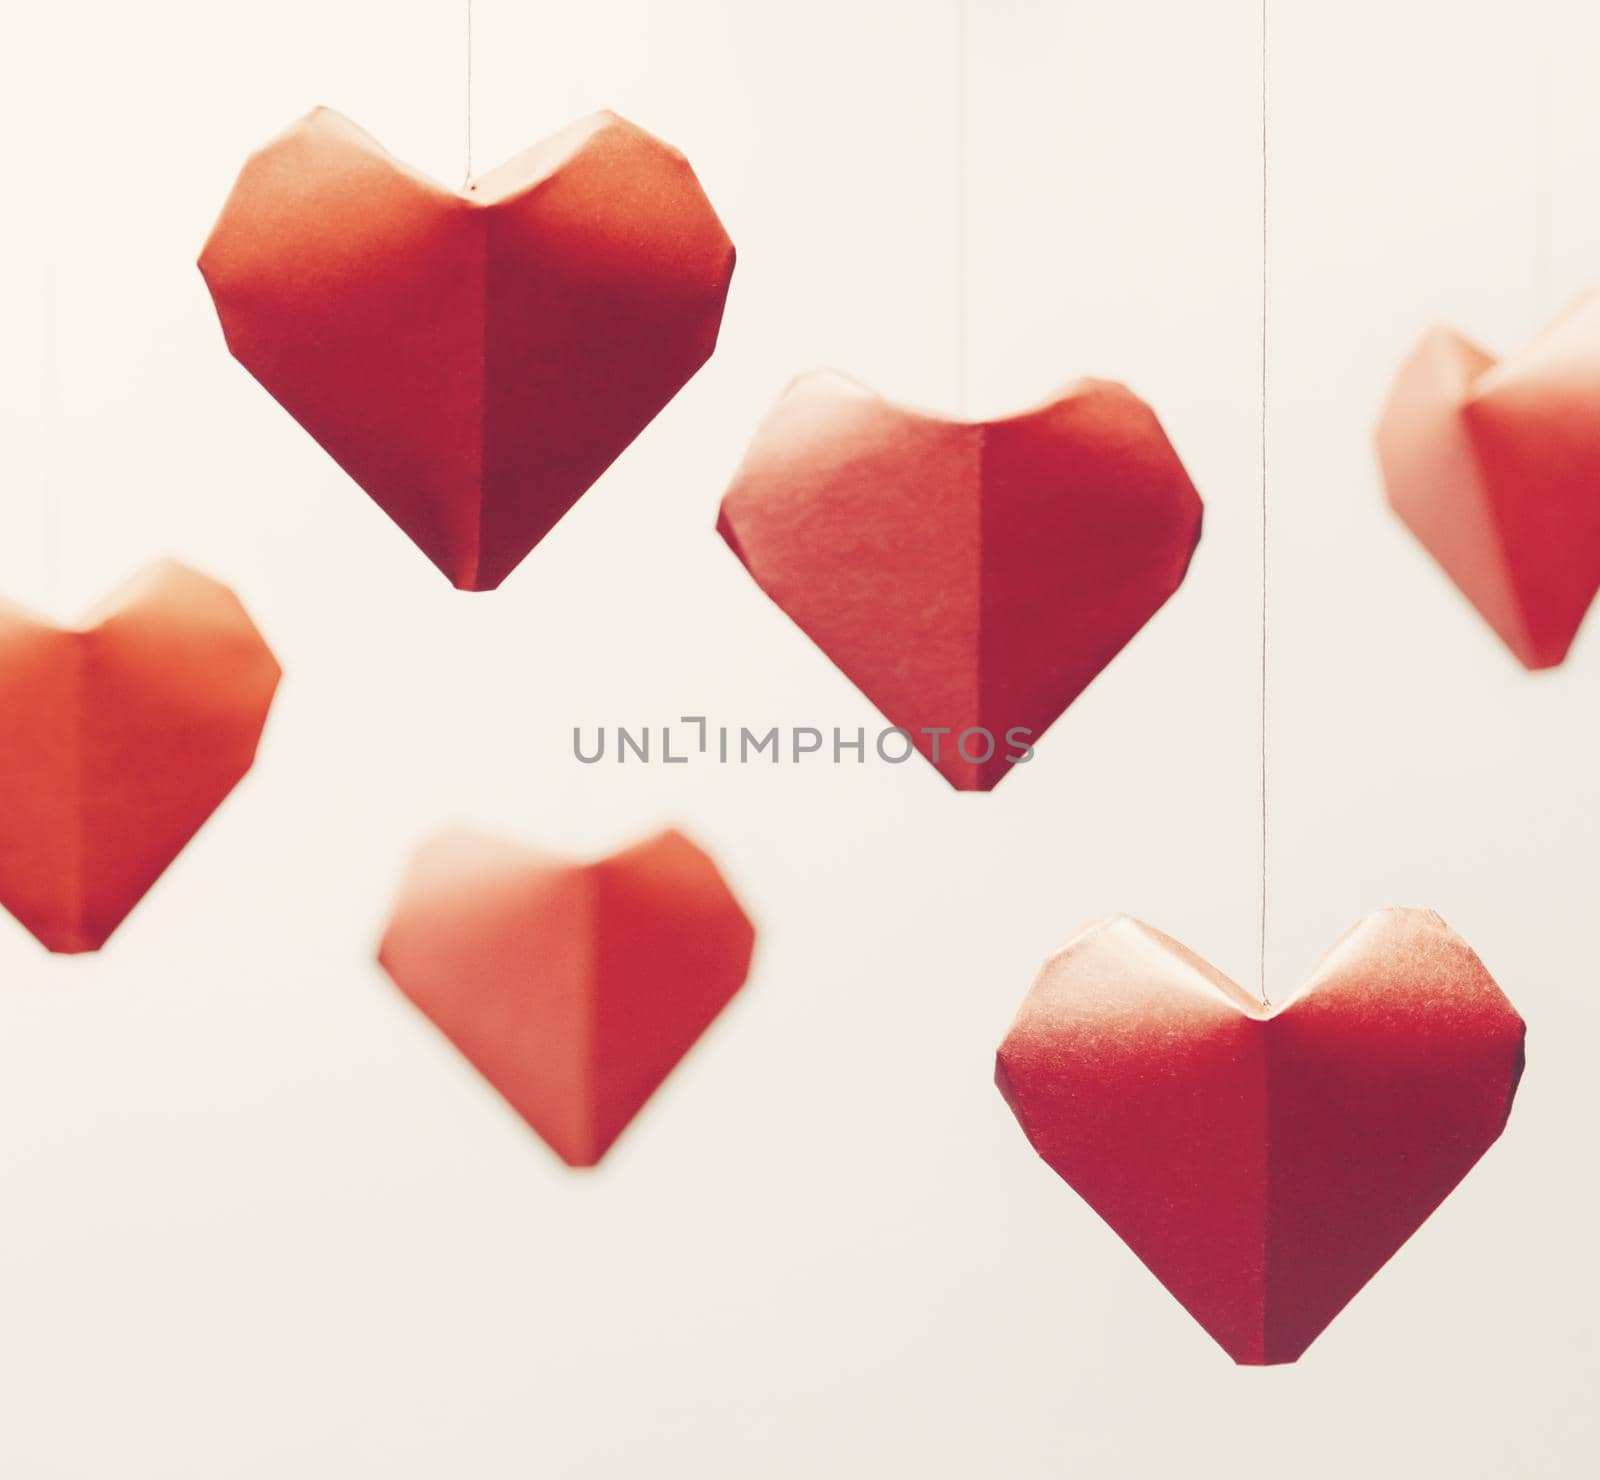 Many red paper origami hearts, symbol of love, on white background. Greeting card on Valentines day.